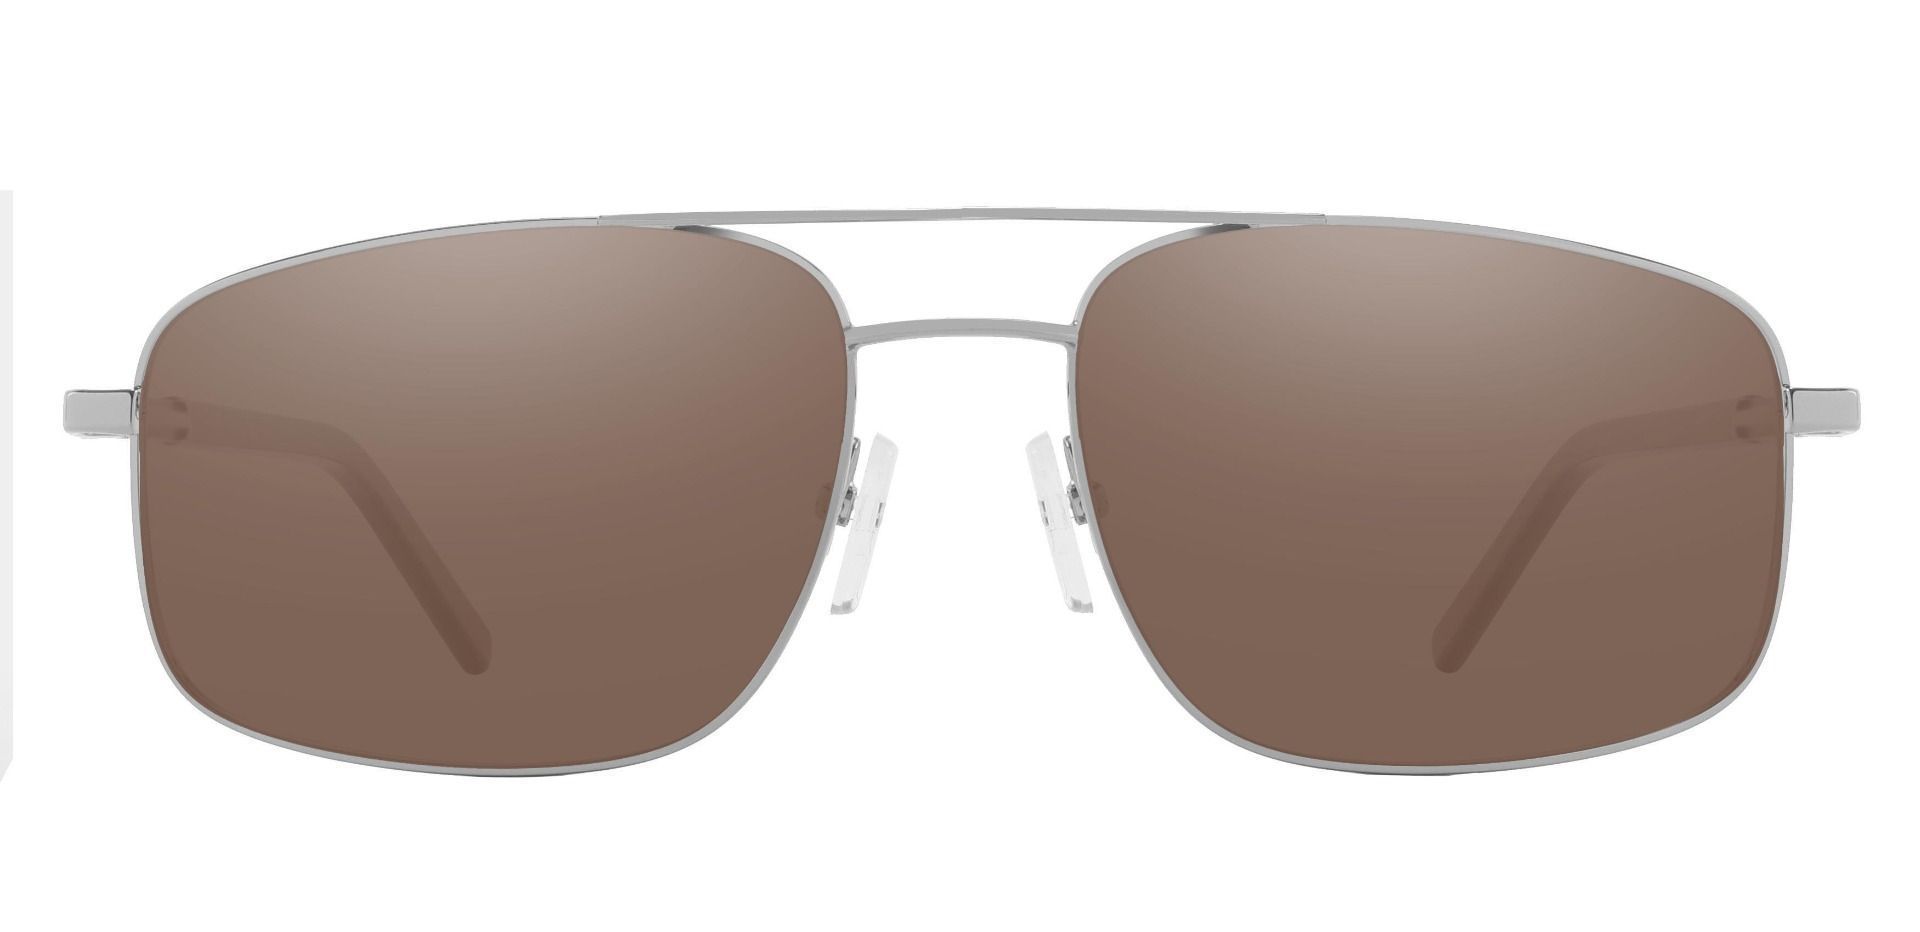 Davenport Aviator Lined Bifocal Sunglasses - Silver Frame With Brown Lenses